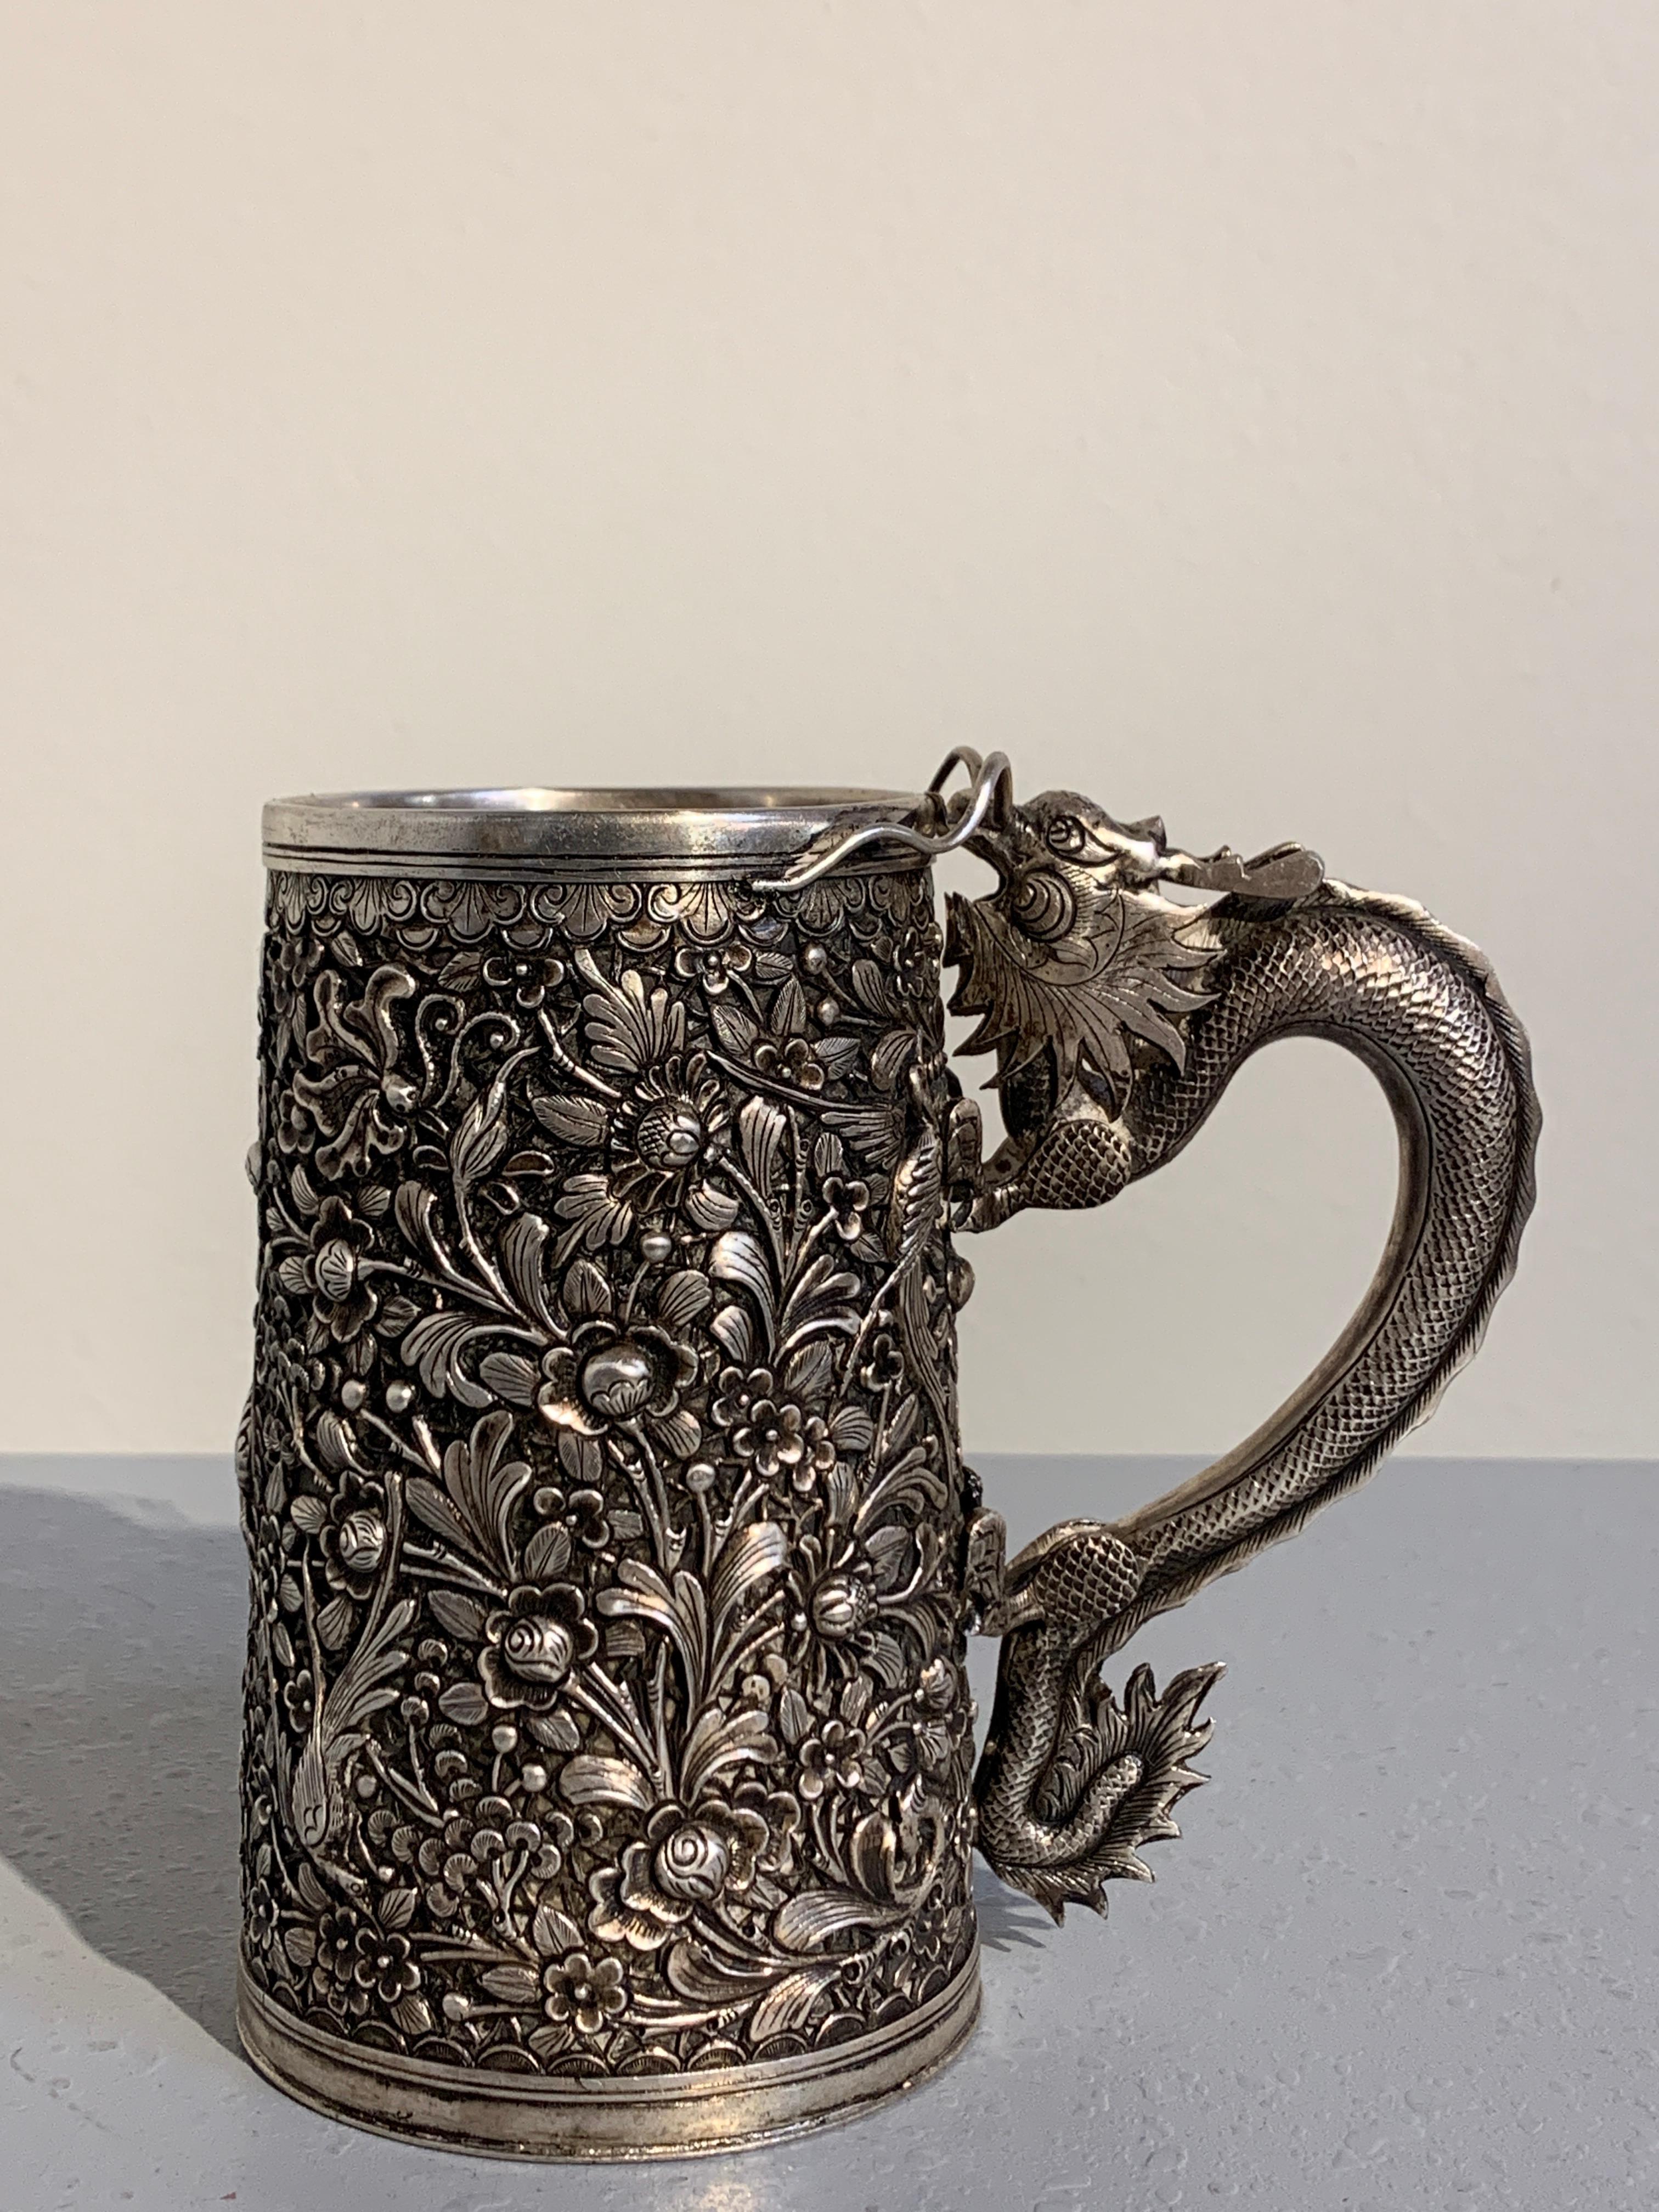 A heavy and well cast Chinese export silver tankard with a dragon handle, made of the Southeast Asian market, mid-late 19th century, China.

The double walled mug or tankard featuring a dense and exuberant scene of long tailed birds amongst a lush